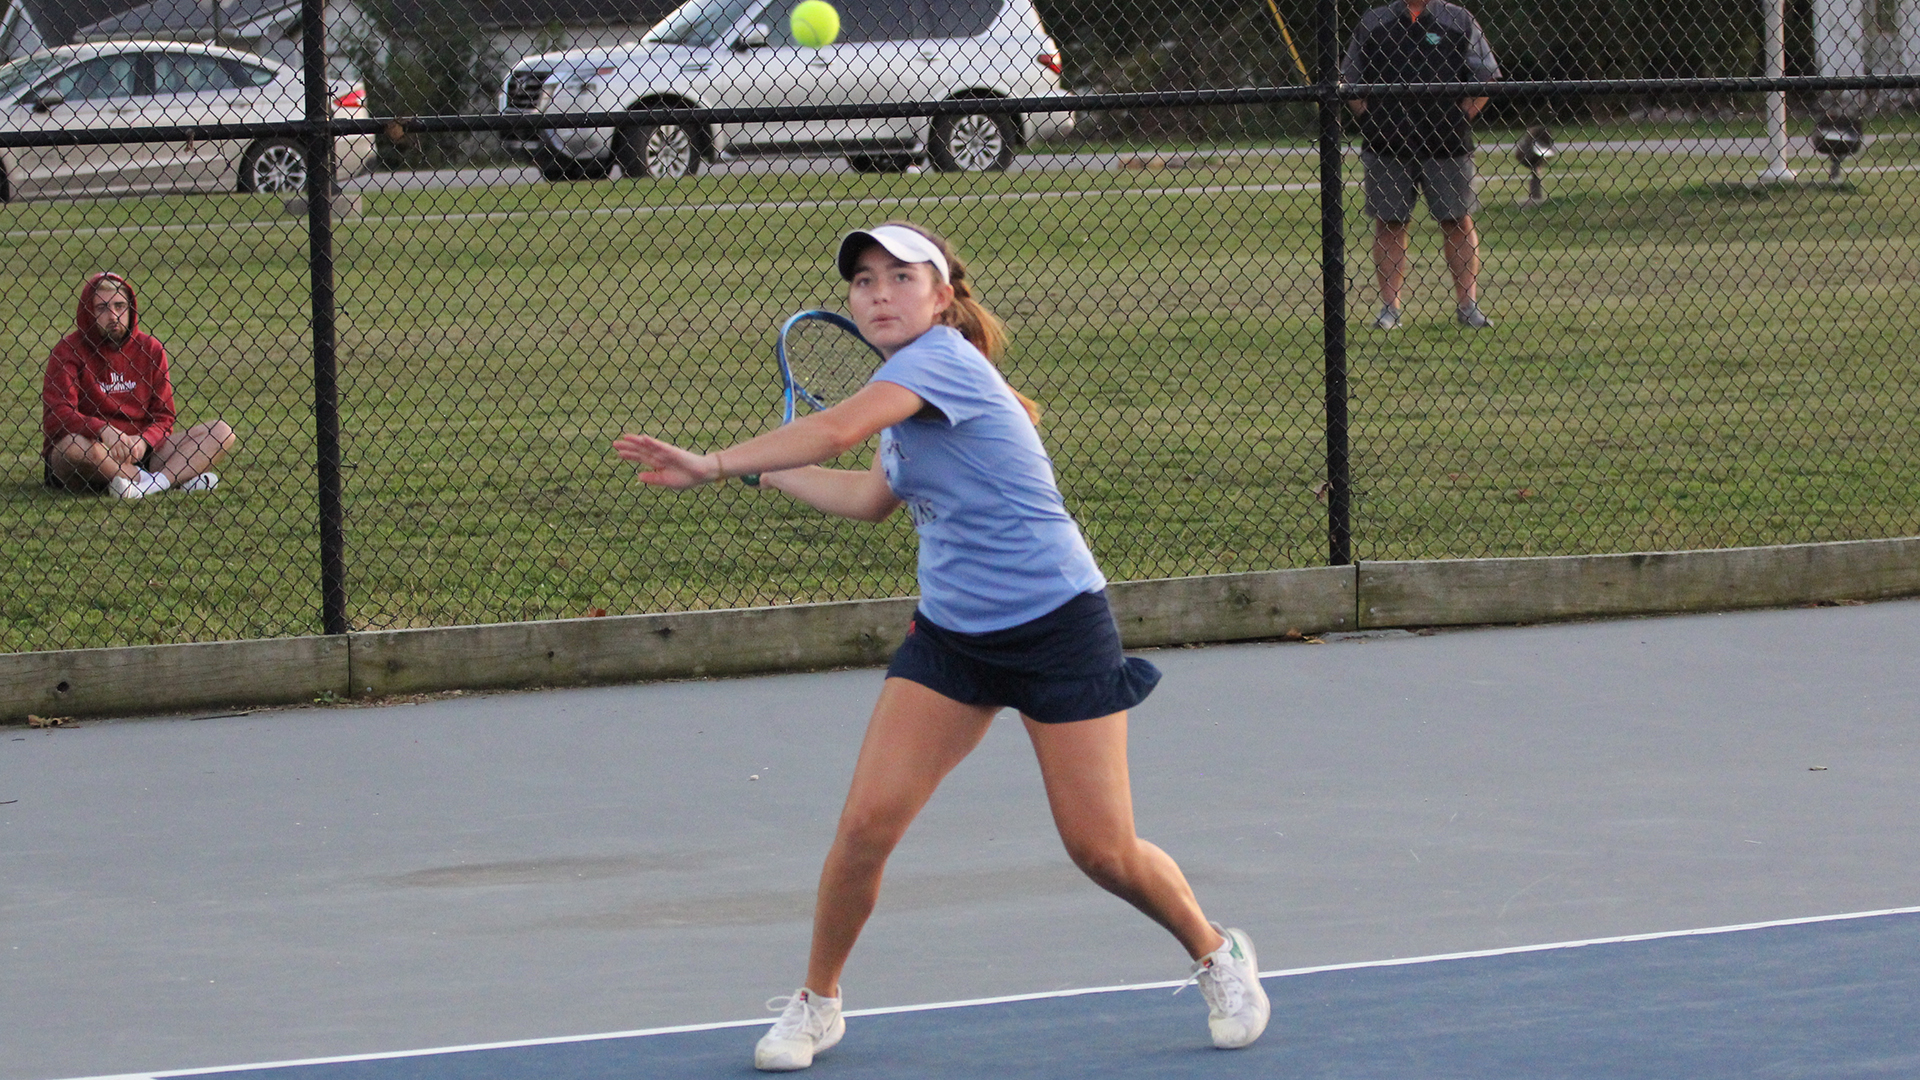 Oakland City finished its season at 11-11 overall after suffering a 4-0 defeat to William Carey in the first round of the NAIA Women's Tennis National Championship.